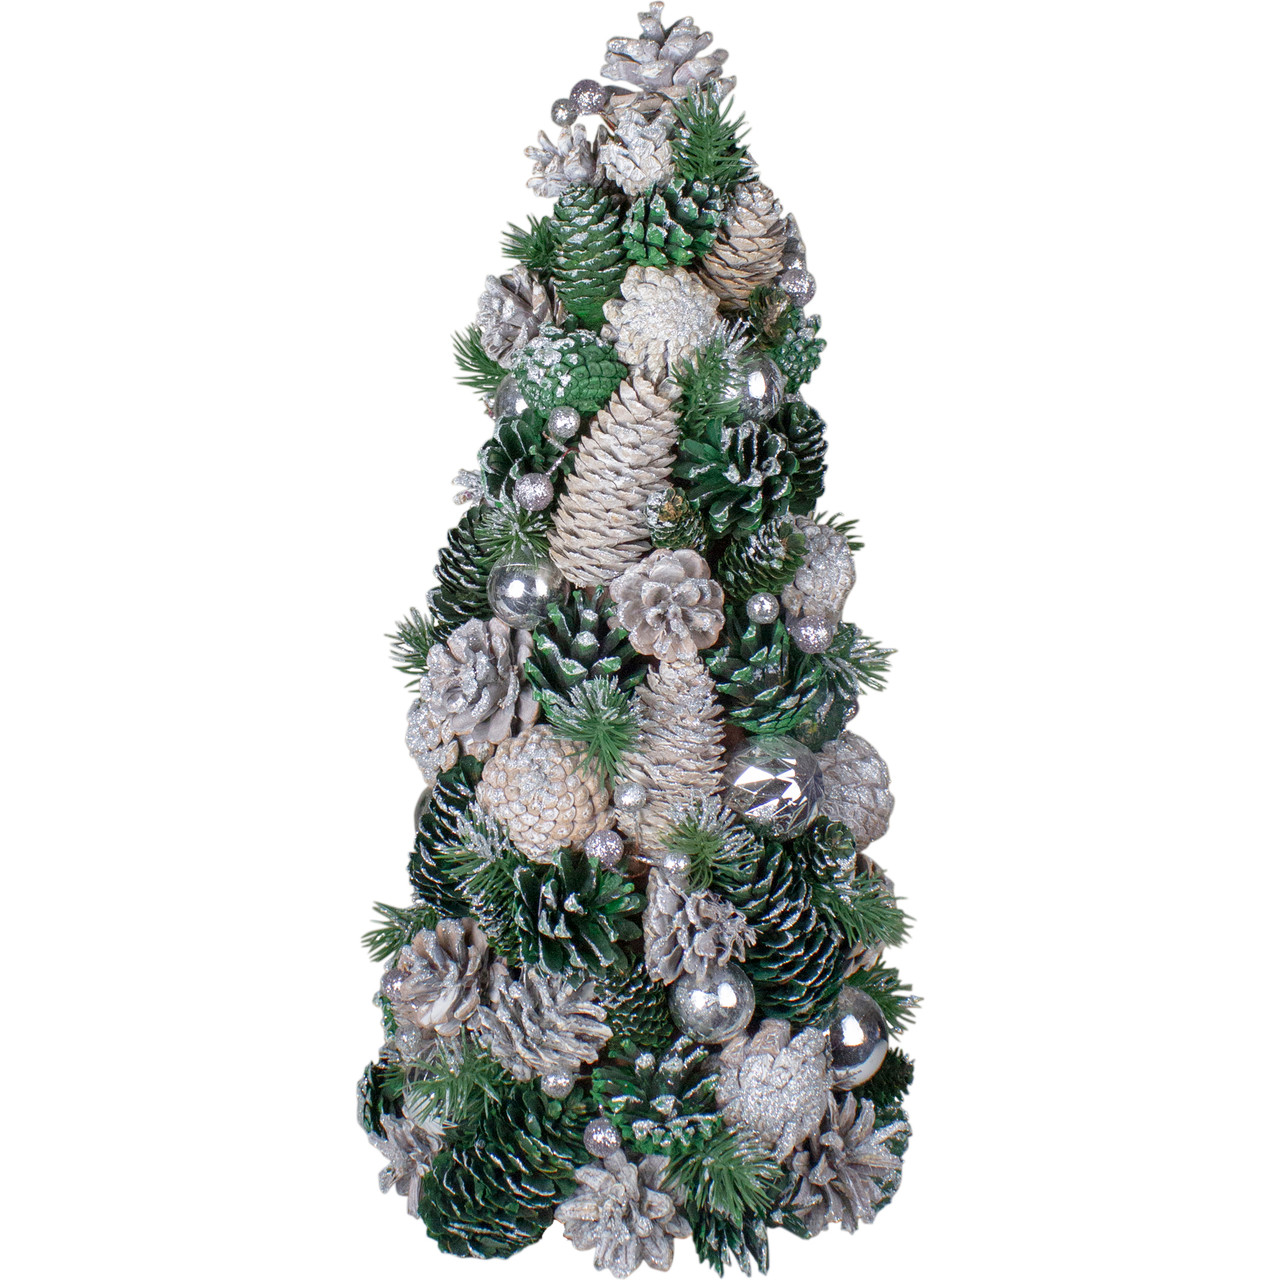 ASSORTED REAL Pine Cones Christmas Weddings tables Decorations